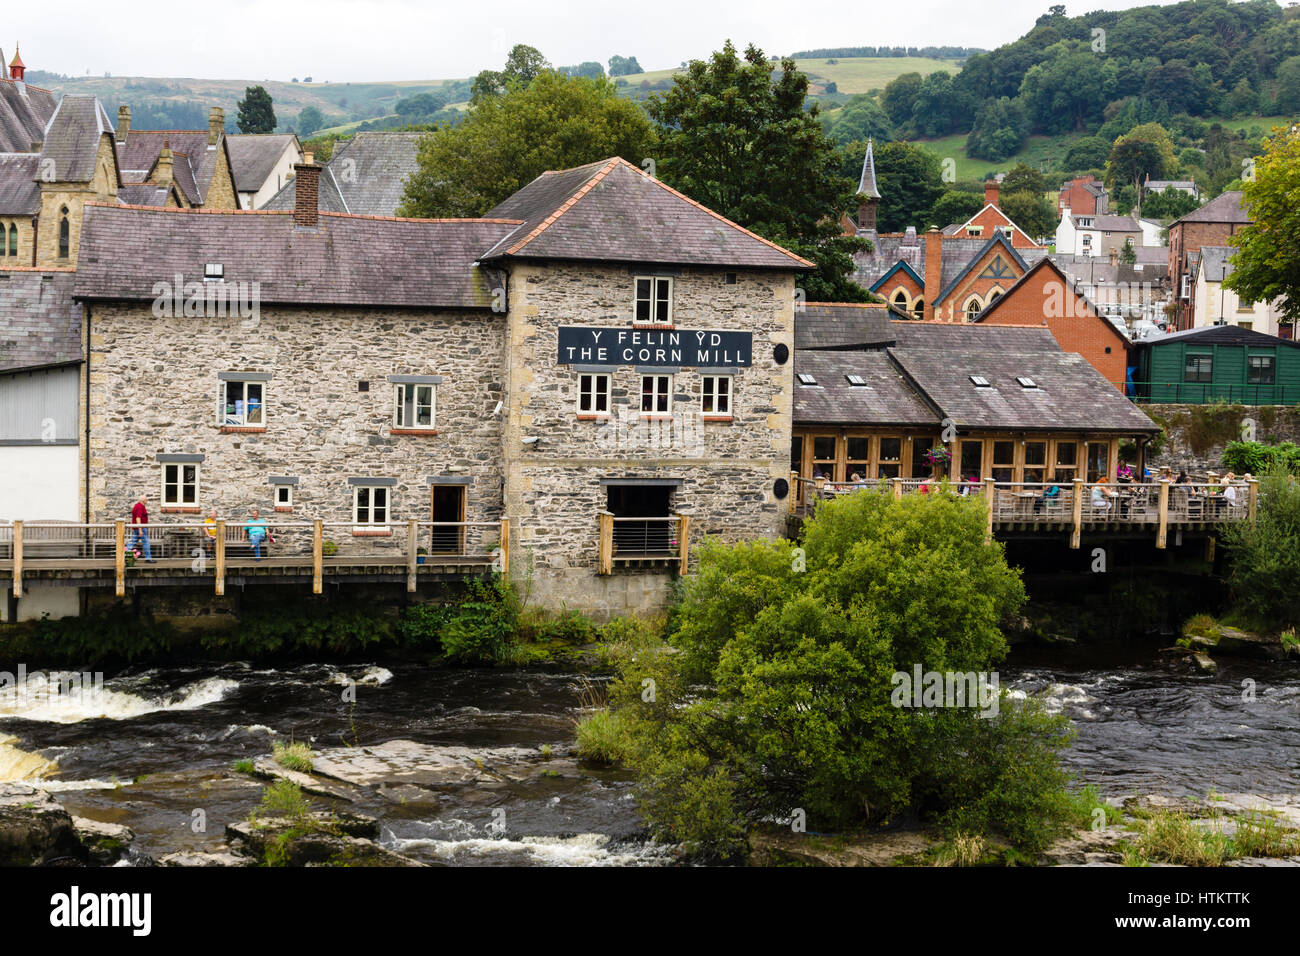 The Corn Mill cafe and bistro next to the Dee bridge in Llangollen Wales on the banks of the River Dee Stock Photo